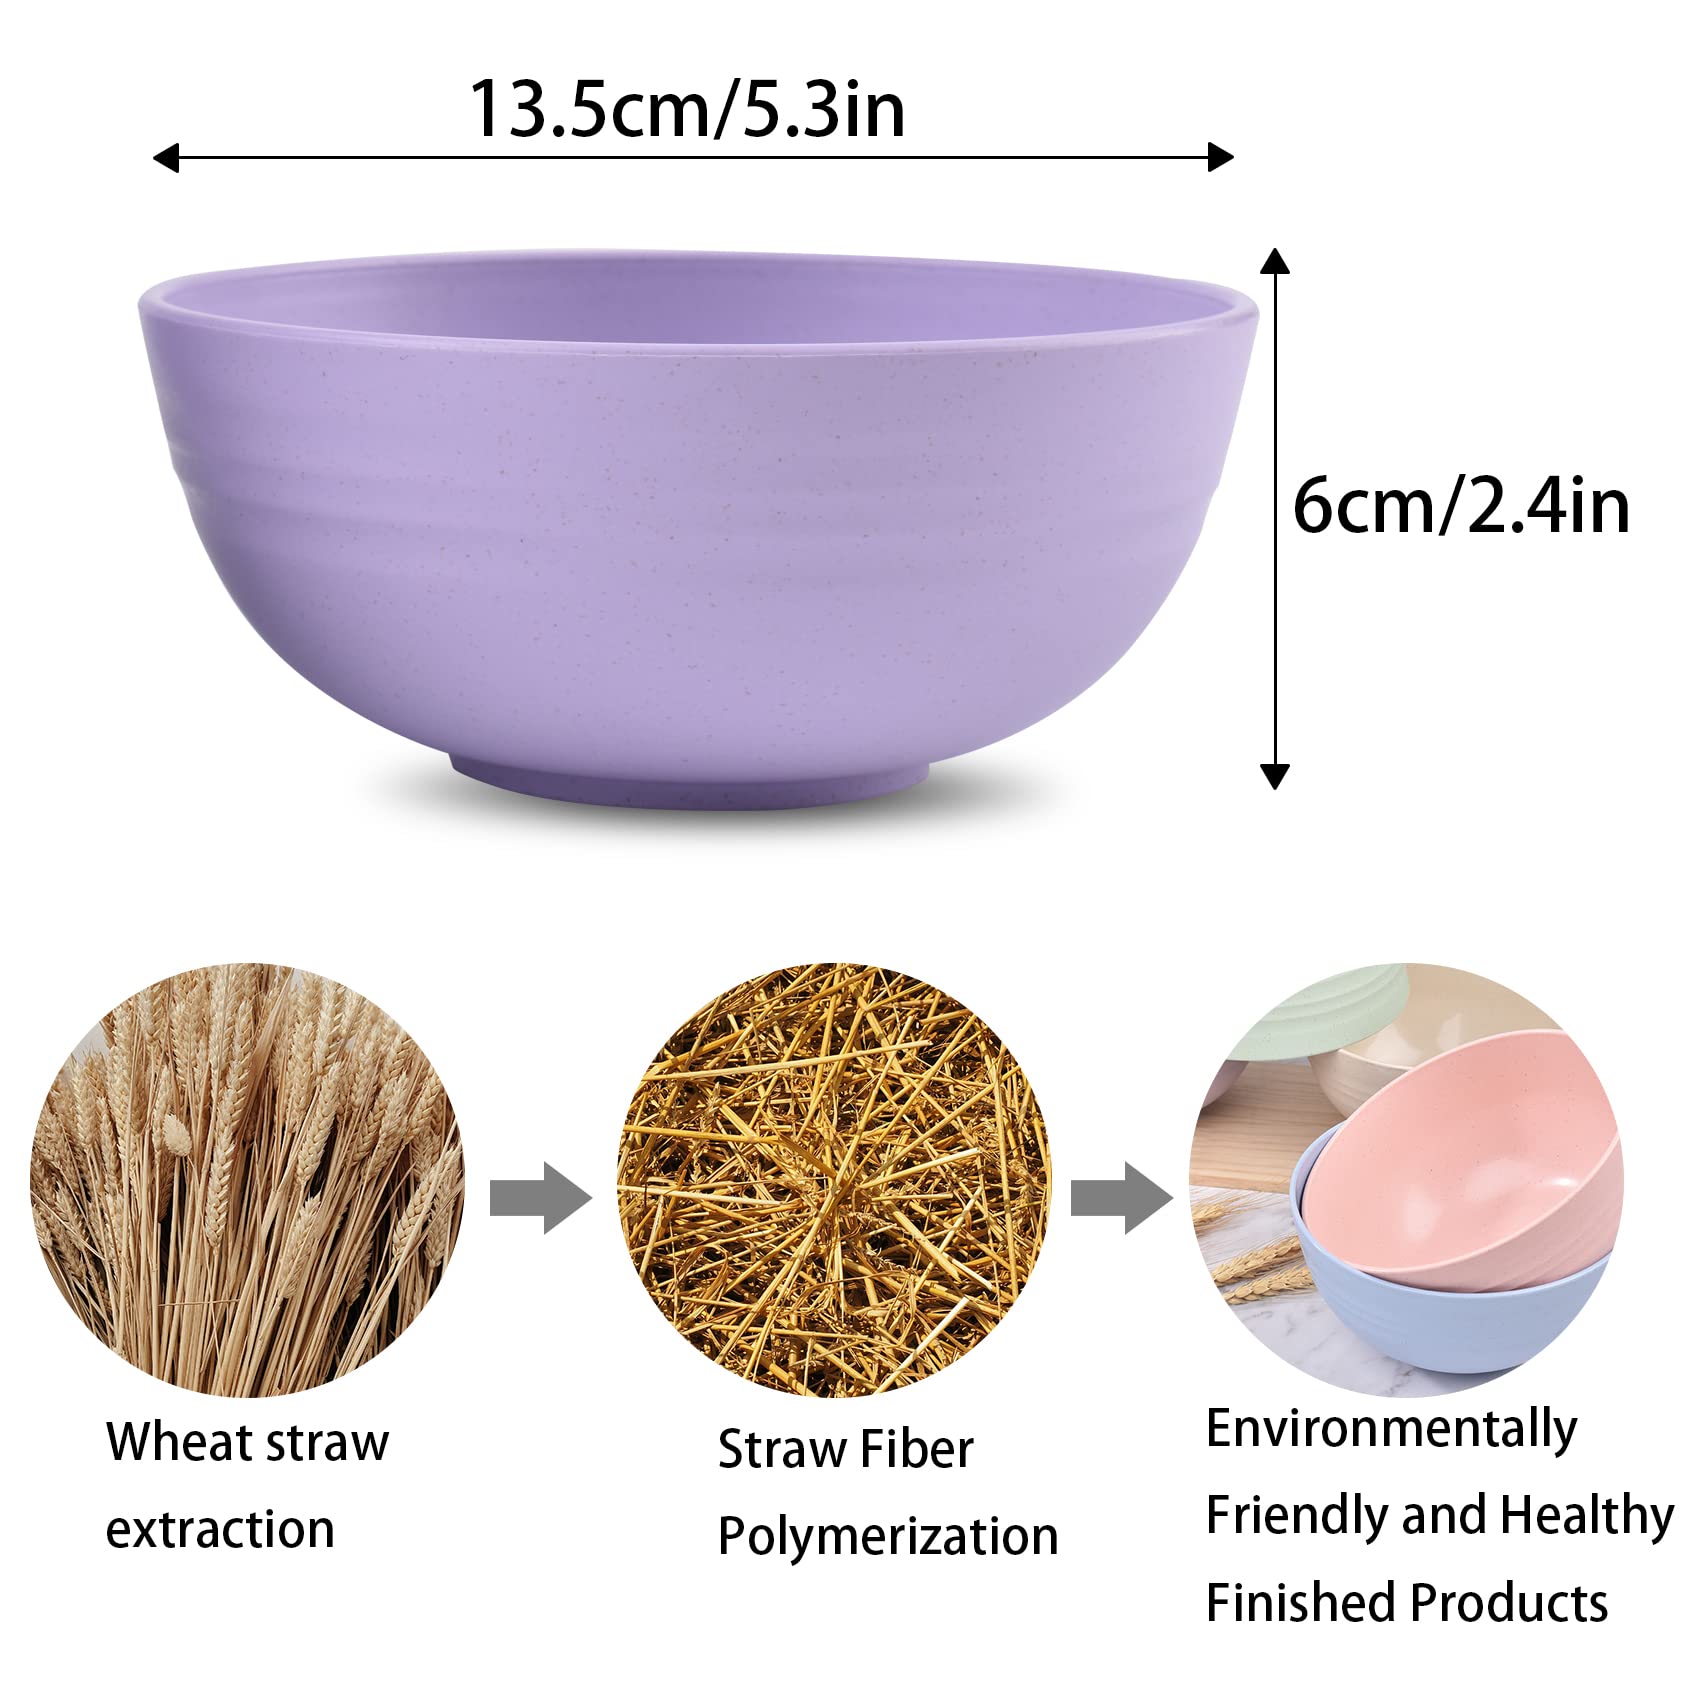 Cuayaes 5Pcs Unbreakable Cereal Bowls, 13.5cm/5.3in Lightweight Wheat Straw Bowl for Everyone, Food-safe Bowls Dishwasher Microwave for Rice,Noodle,Snack, Salad,Soup (Purple)